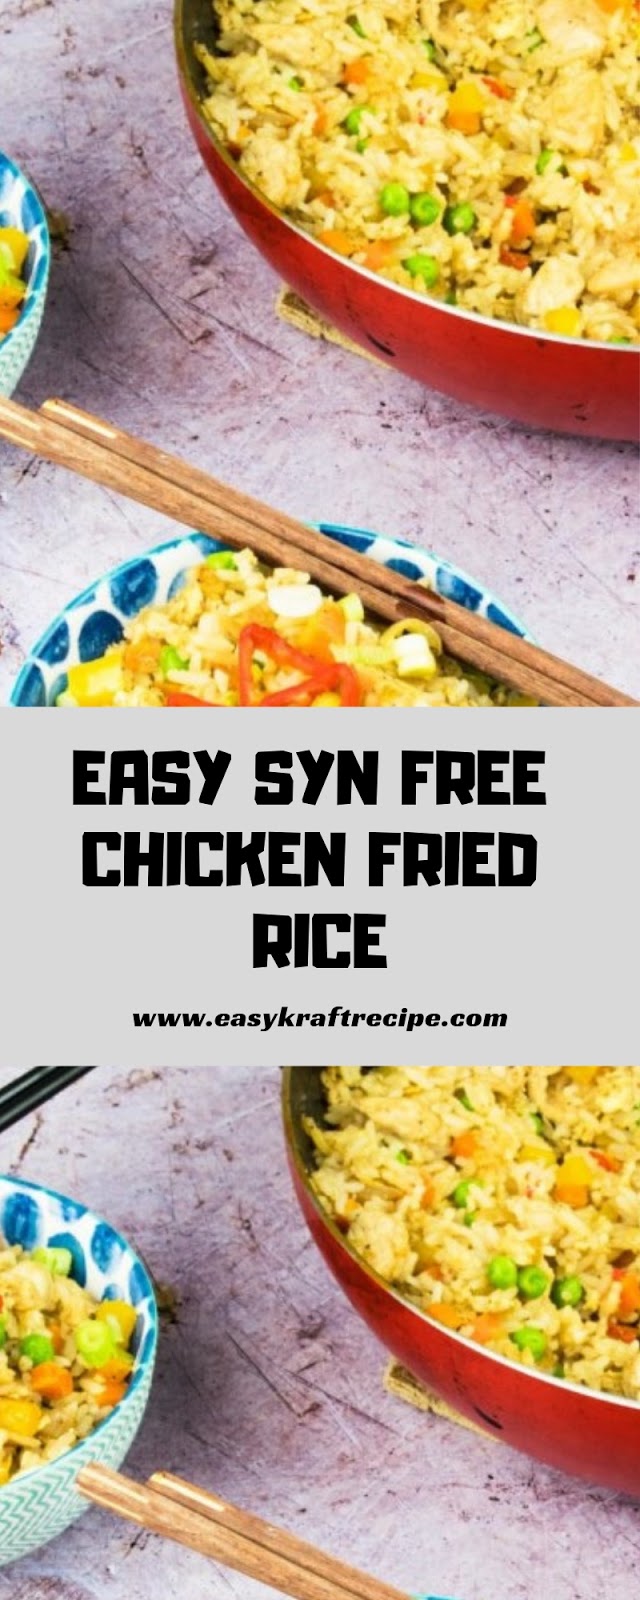 EASY SYN FREE CHICKEN FRIED RICE